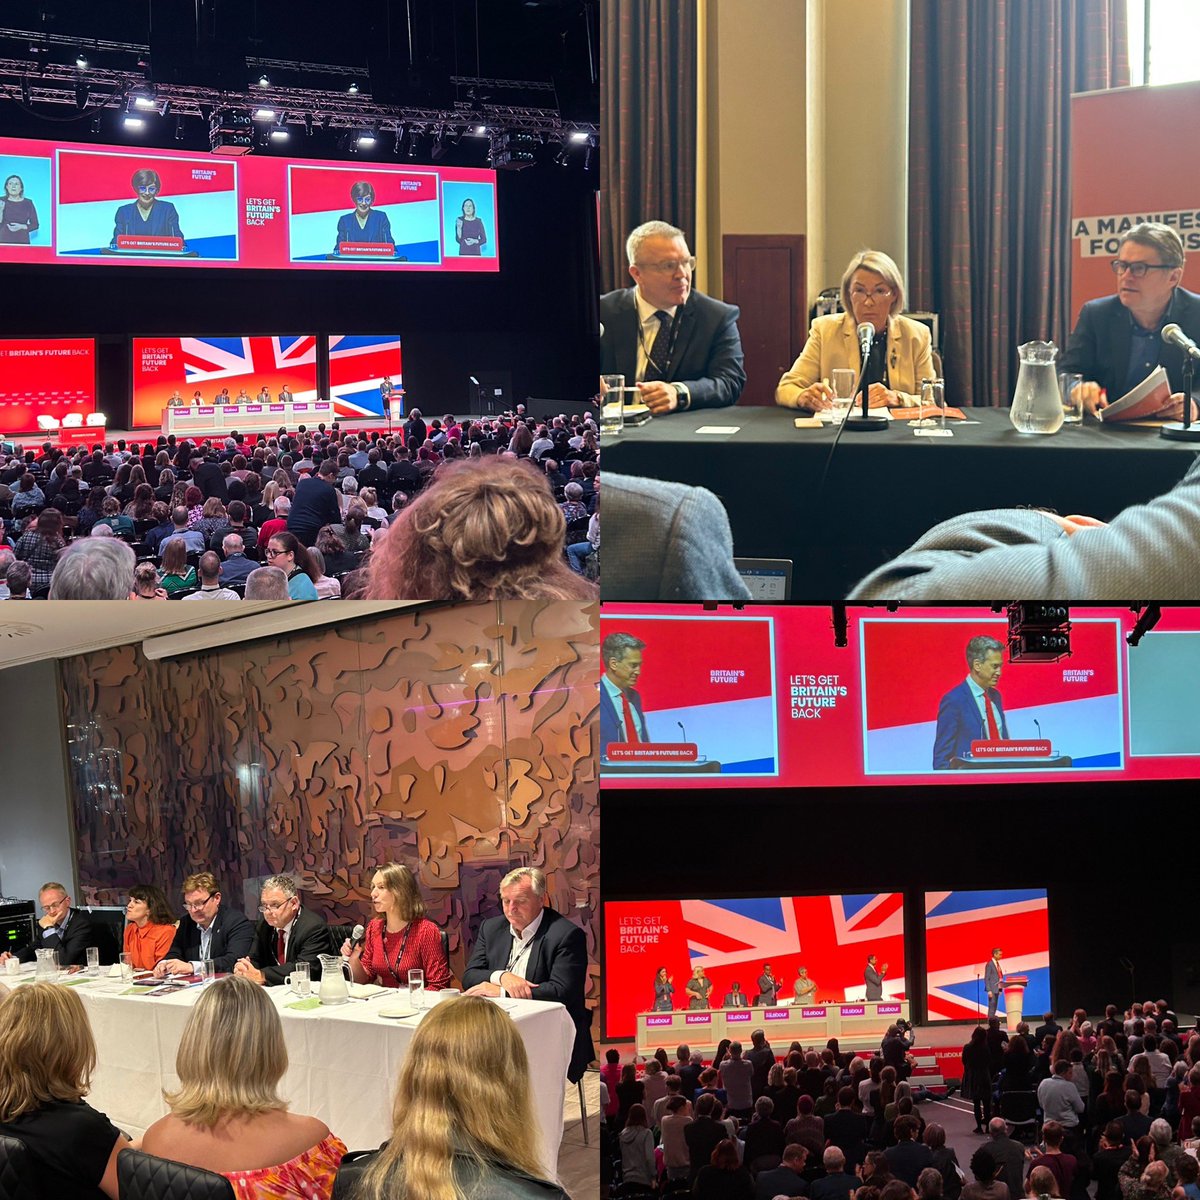 Exciting day at #labourconference - snaps from the @UK_Music panel featuring @tom_watson @KevinBrennanMP and @KeeleyMP. In for @ThangamMP and @Ed_Miliband speeches and supporting @elsieblundell in a housing fringe event. So many fantastic ideas for the next Labour government. 🌹